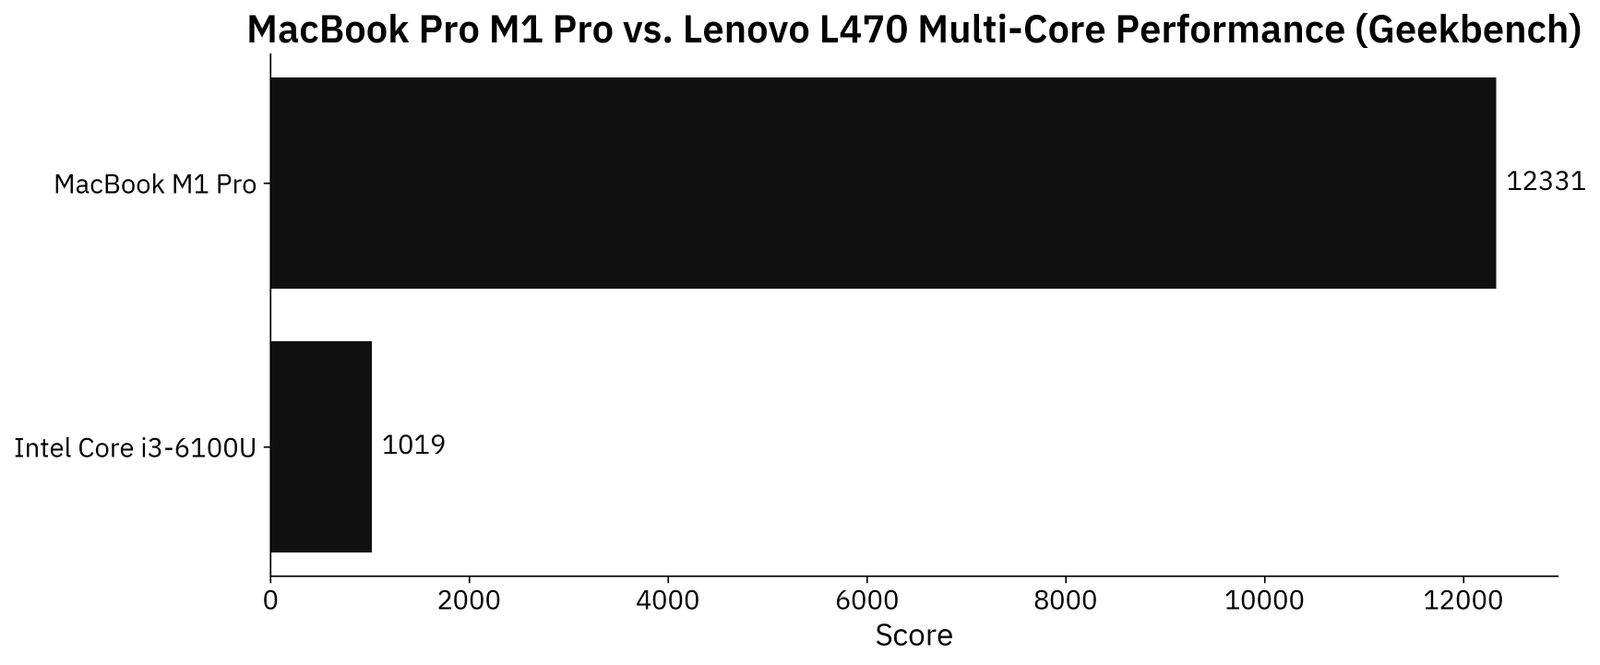 Image 3 - Geekbench multi-core performance (image by author)